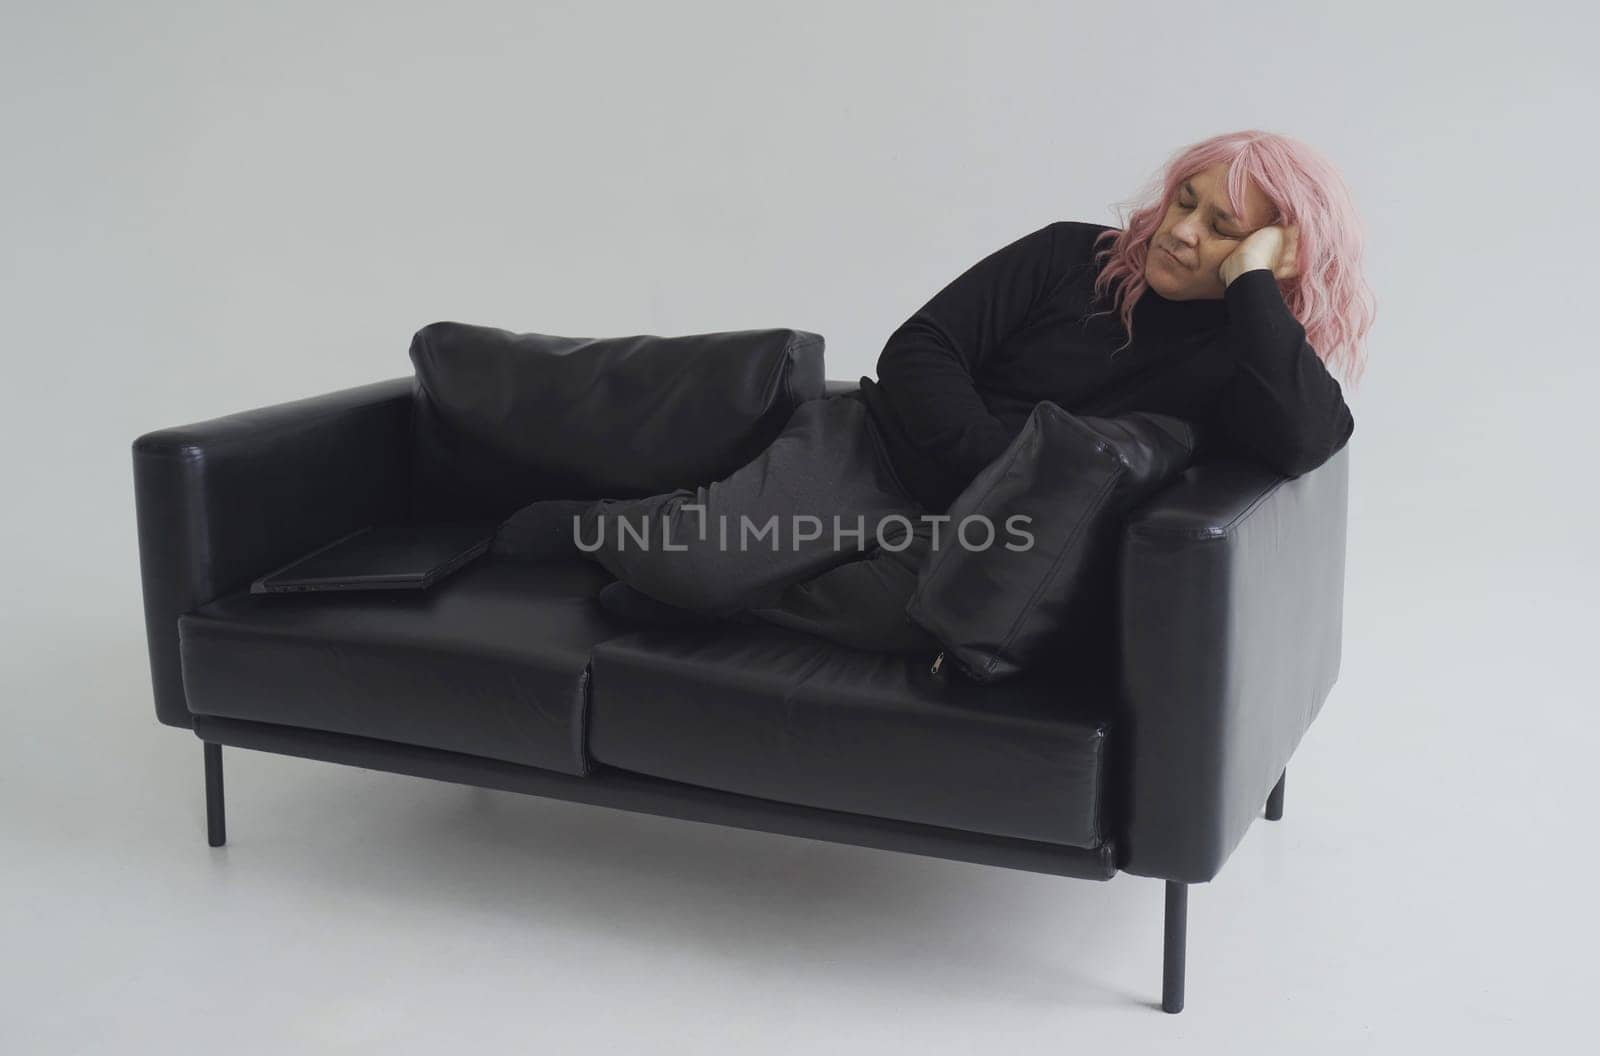 A man in a pink wig is sleeping on the couch. White background.